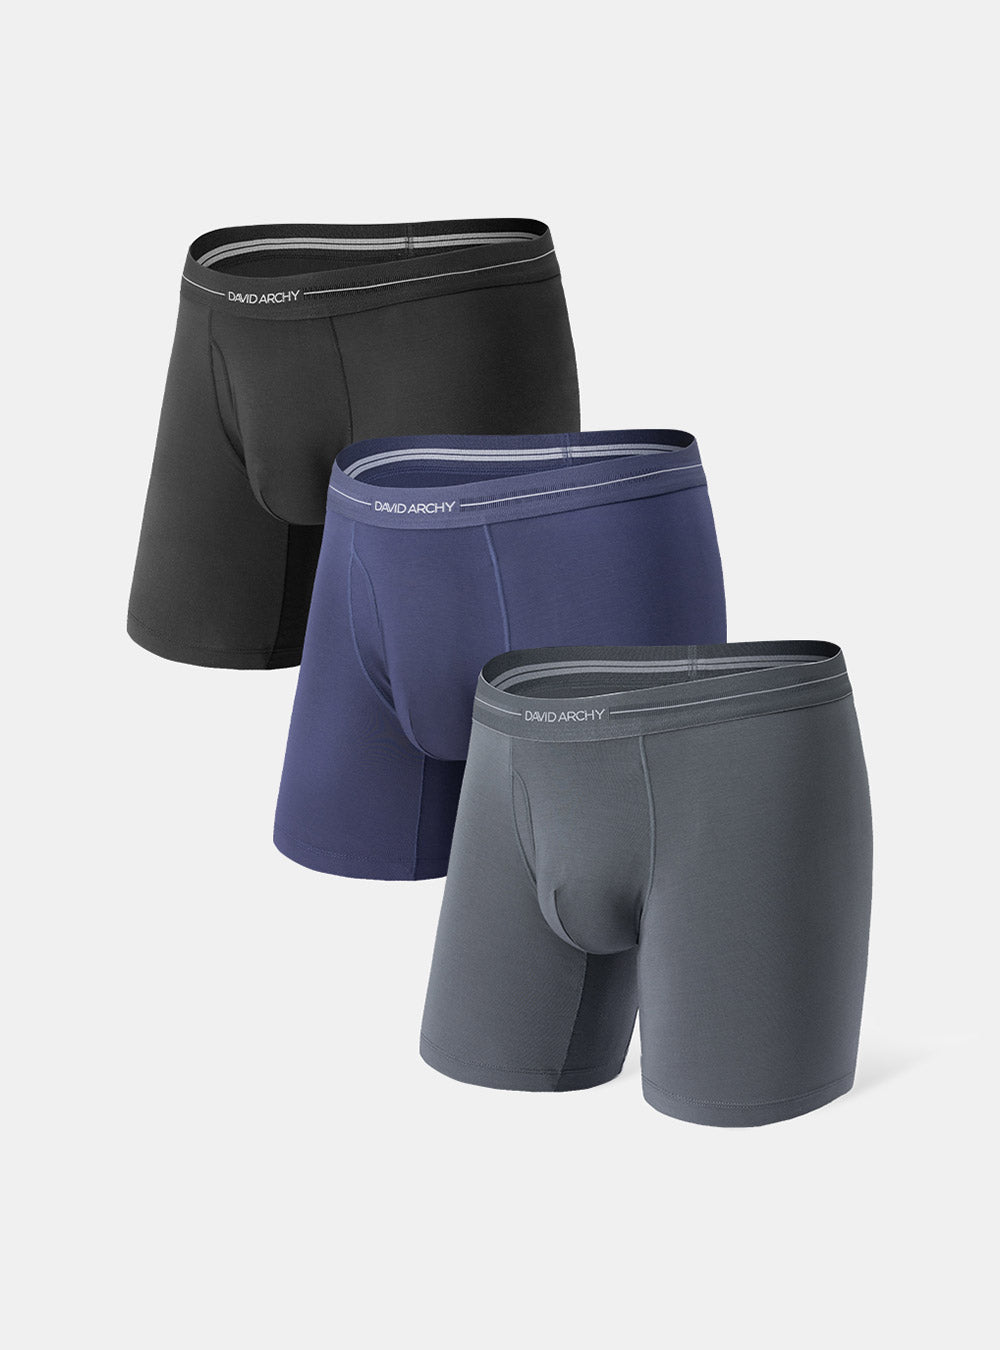 David Archy Clothing on X: Our collection of men's underwear is designed  to elevate your at-home style game. We've covered you in comfort and style  from soft fabrics to modern designs. 🛒 #